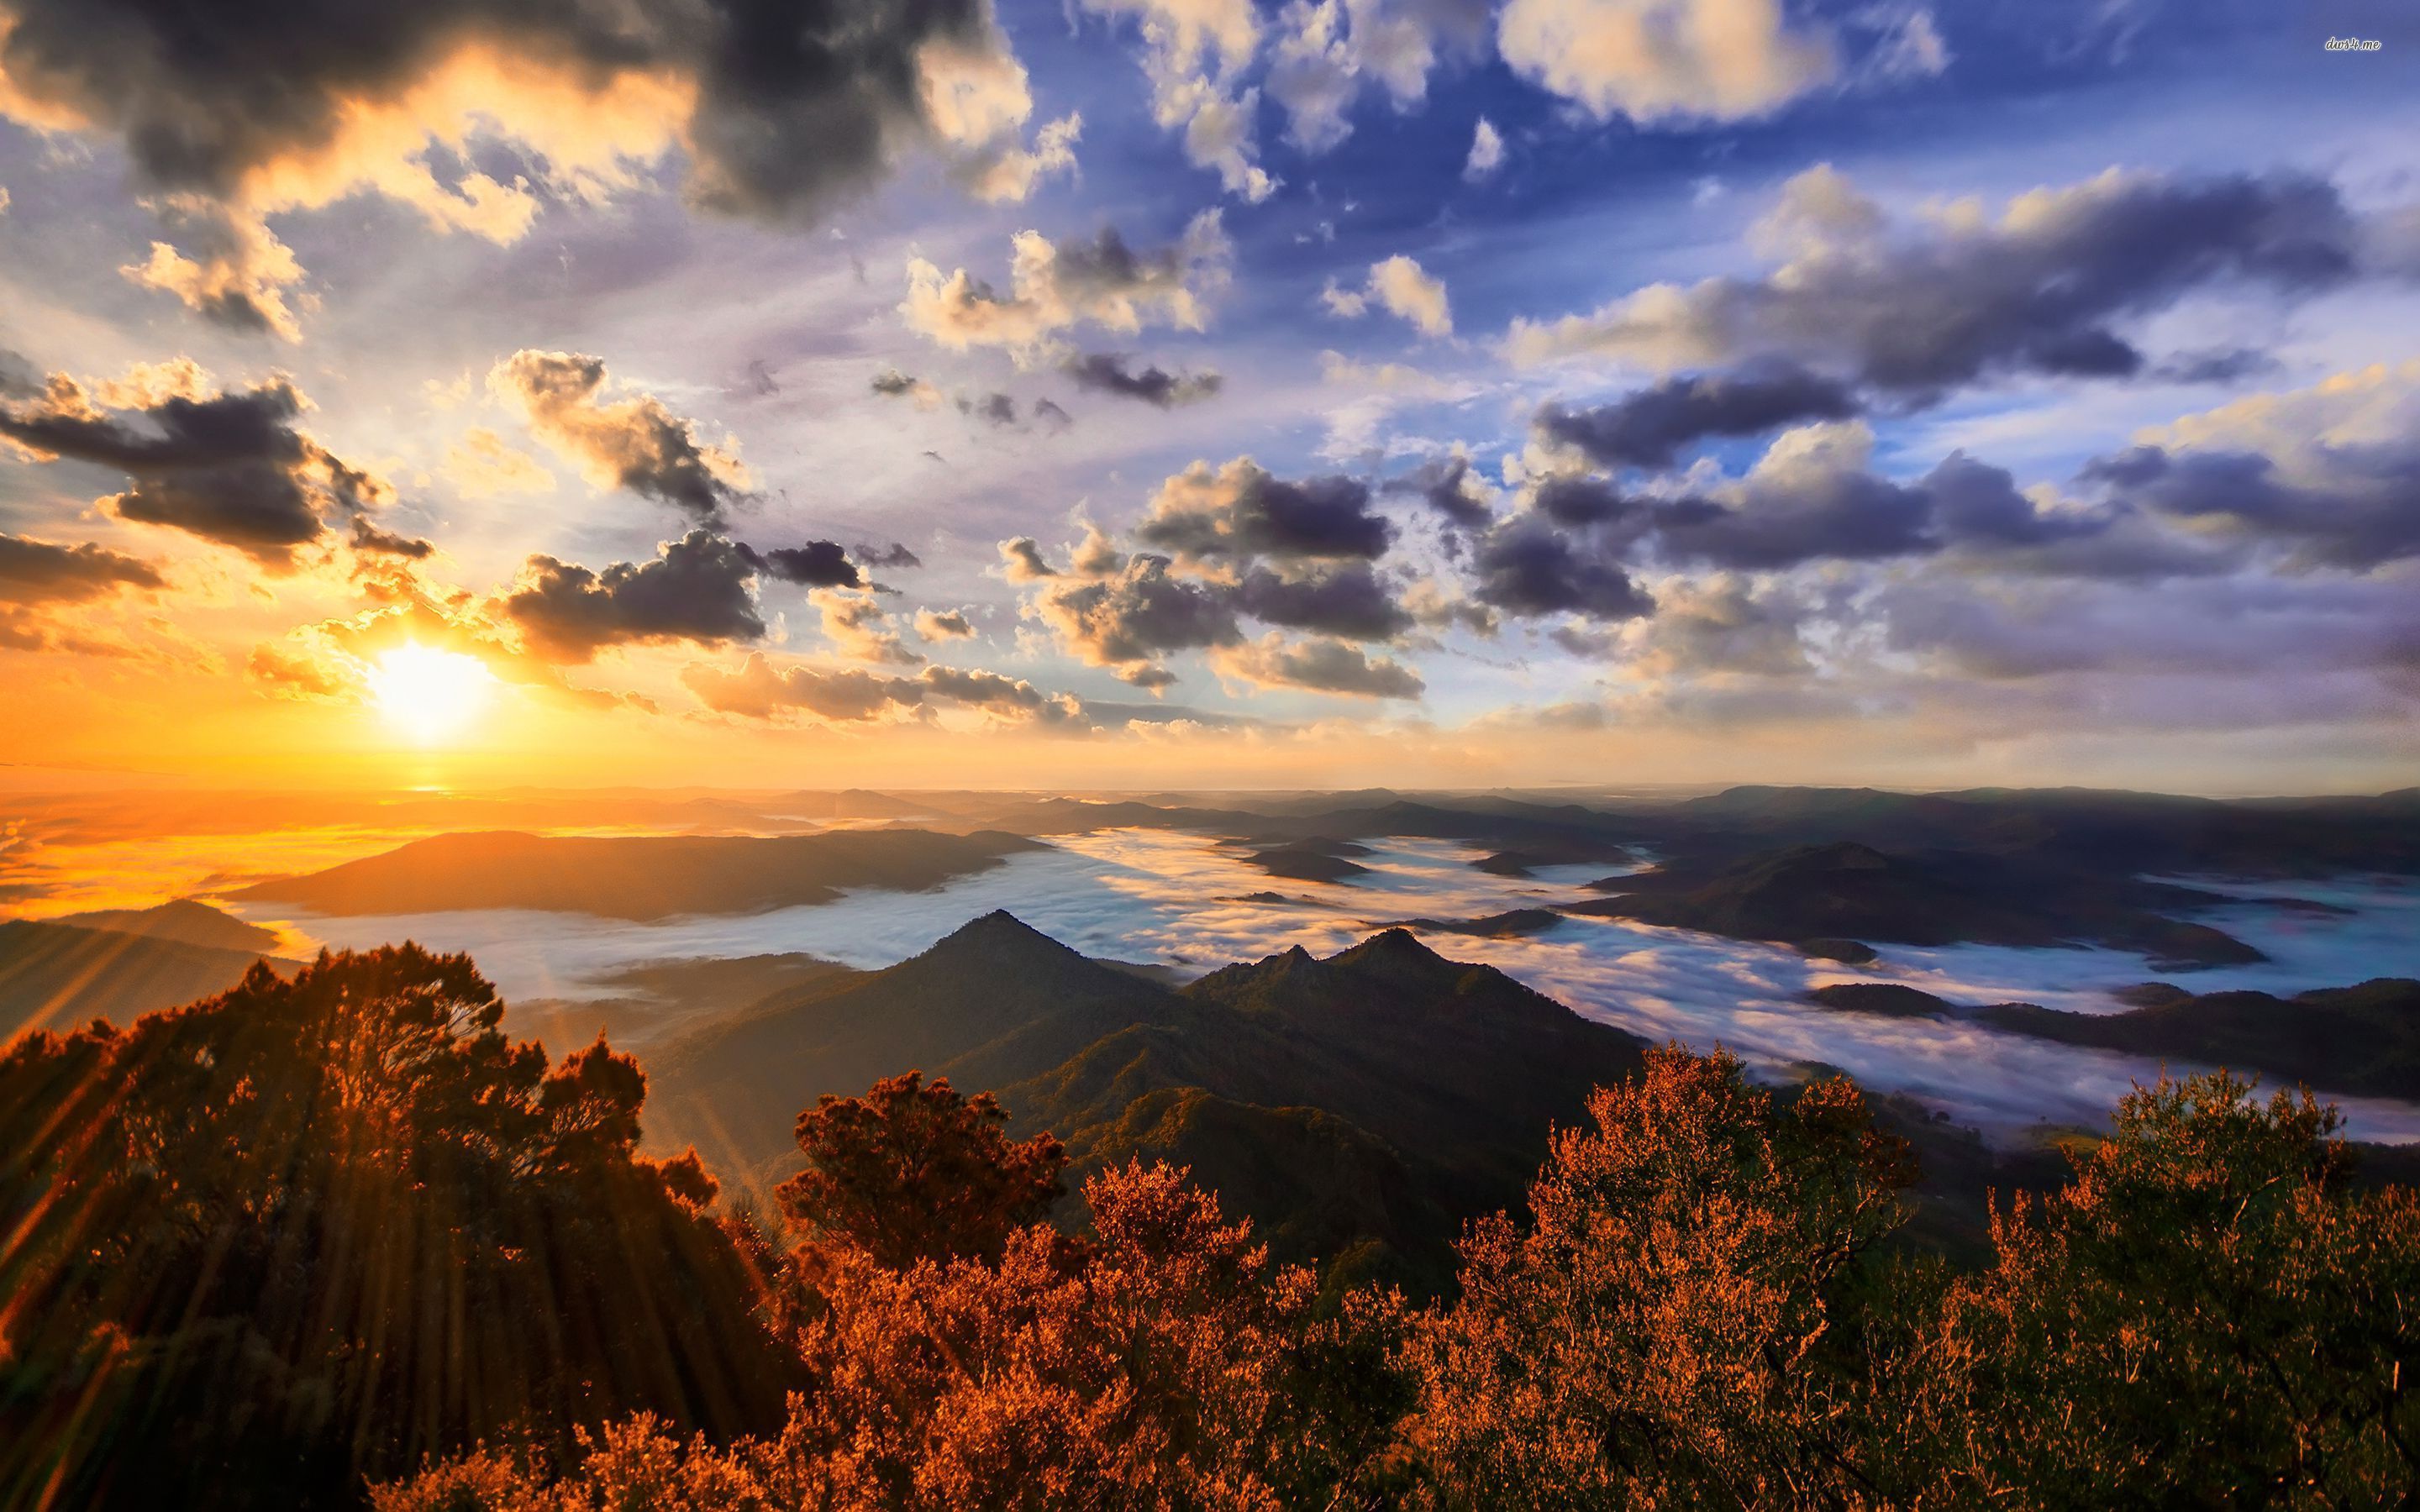 Sunrise over the mountains wallpaper - Nature wallpapers - #23114